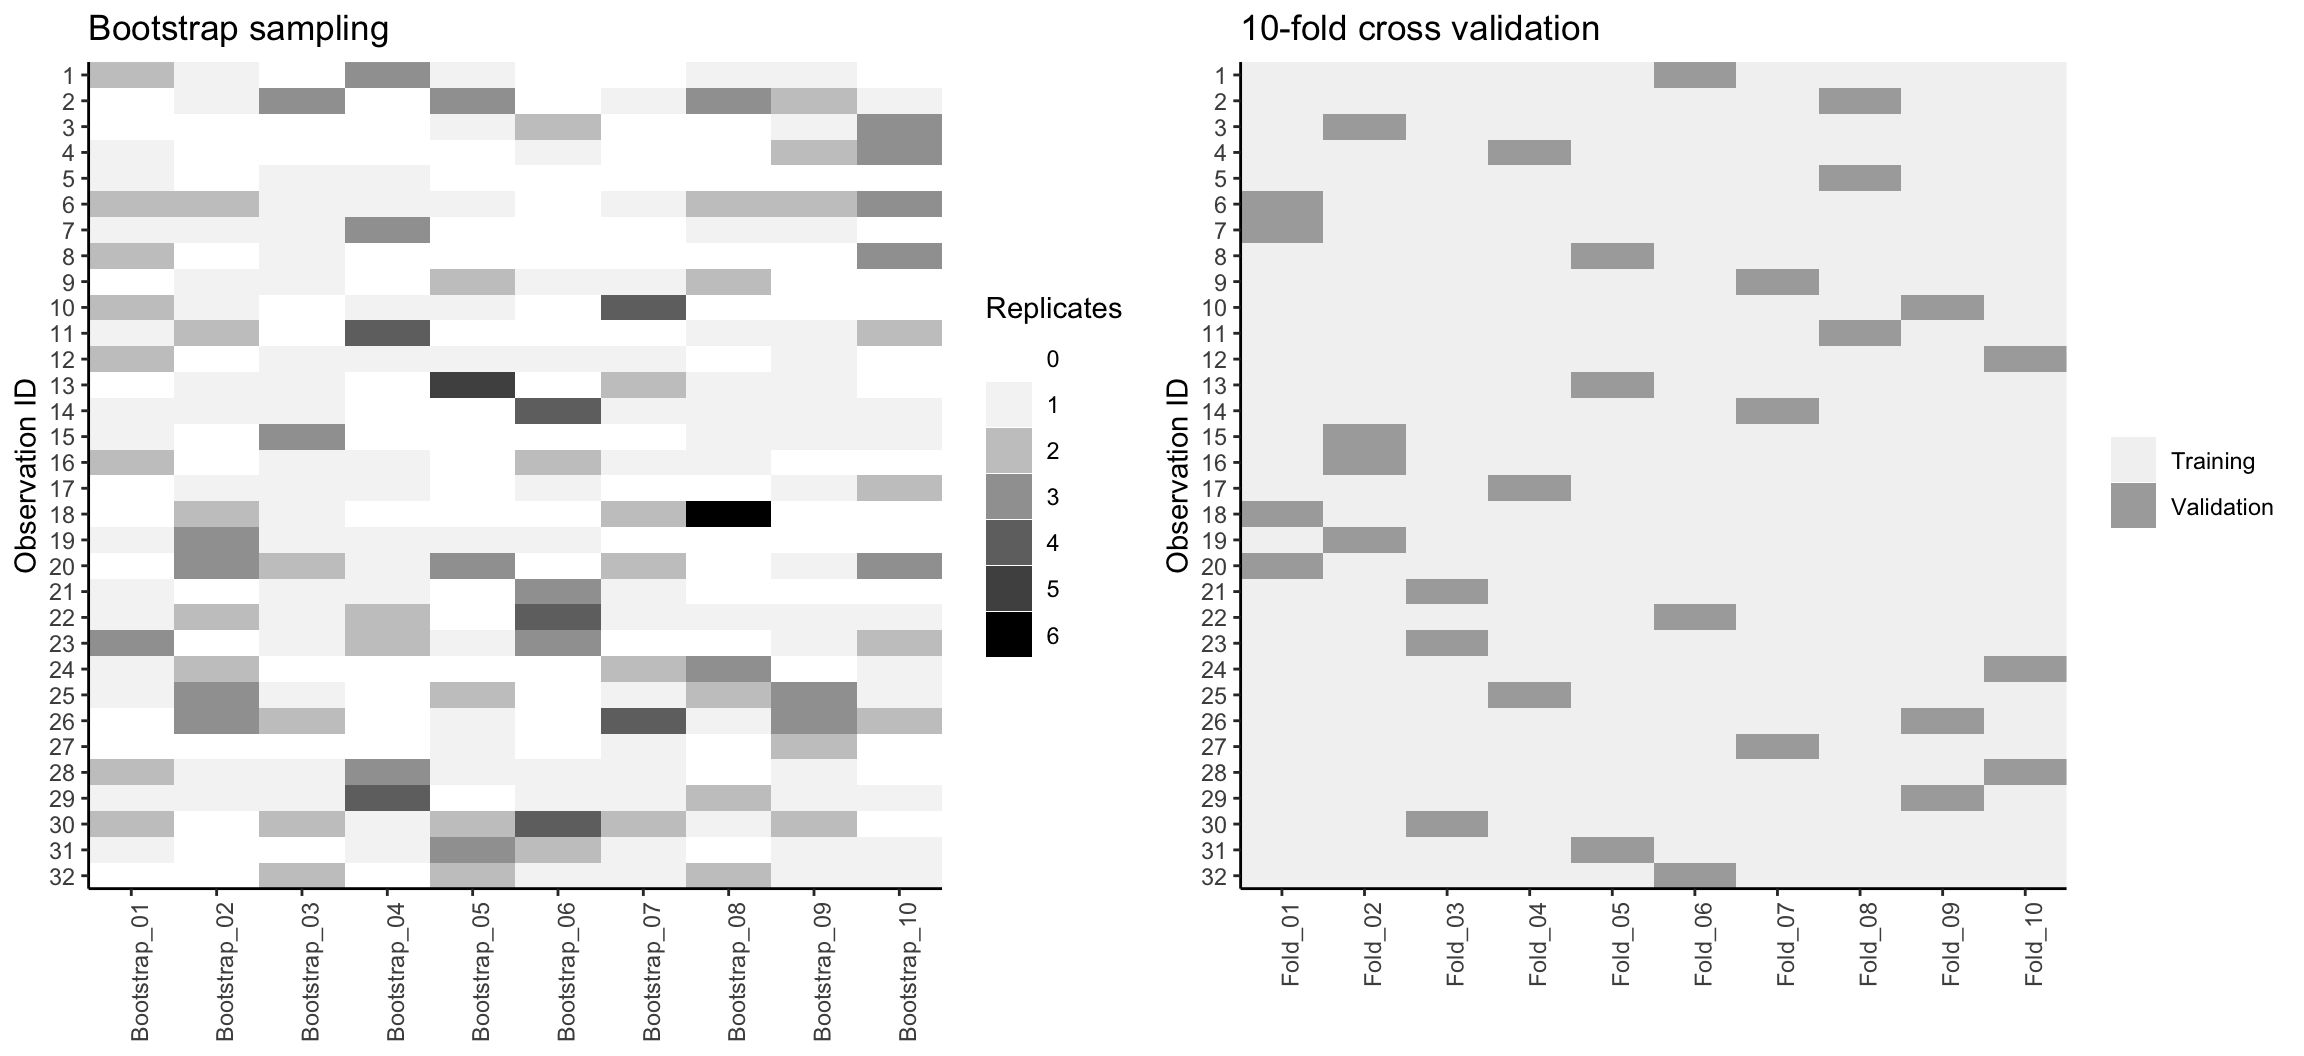 Bootstrap sampling (left) versus 10-fold cross validation (right) on 32 observations. For bootstrap sampling, the observations that have zero replications (white) are the out-of-bag observations used for validation.